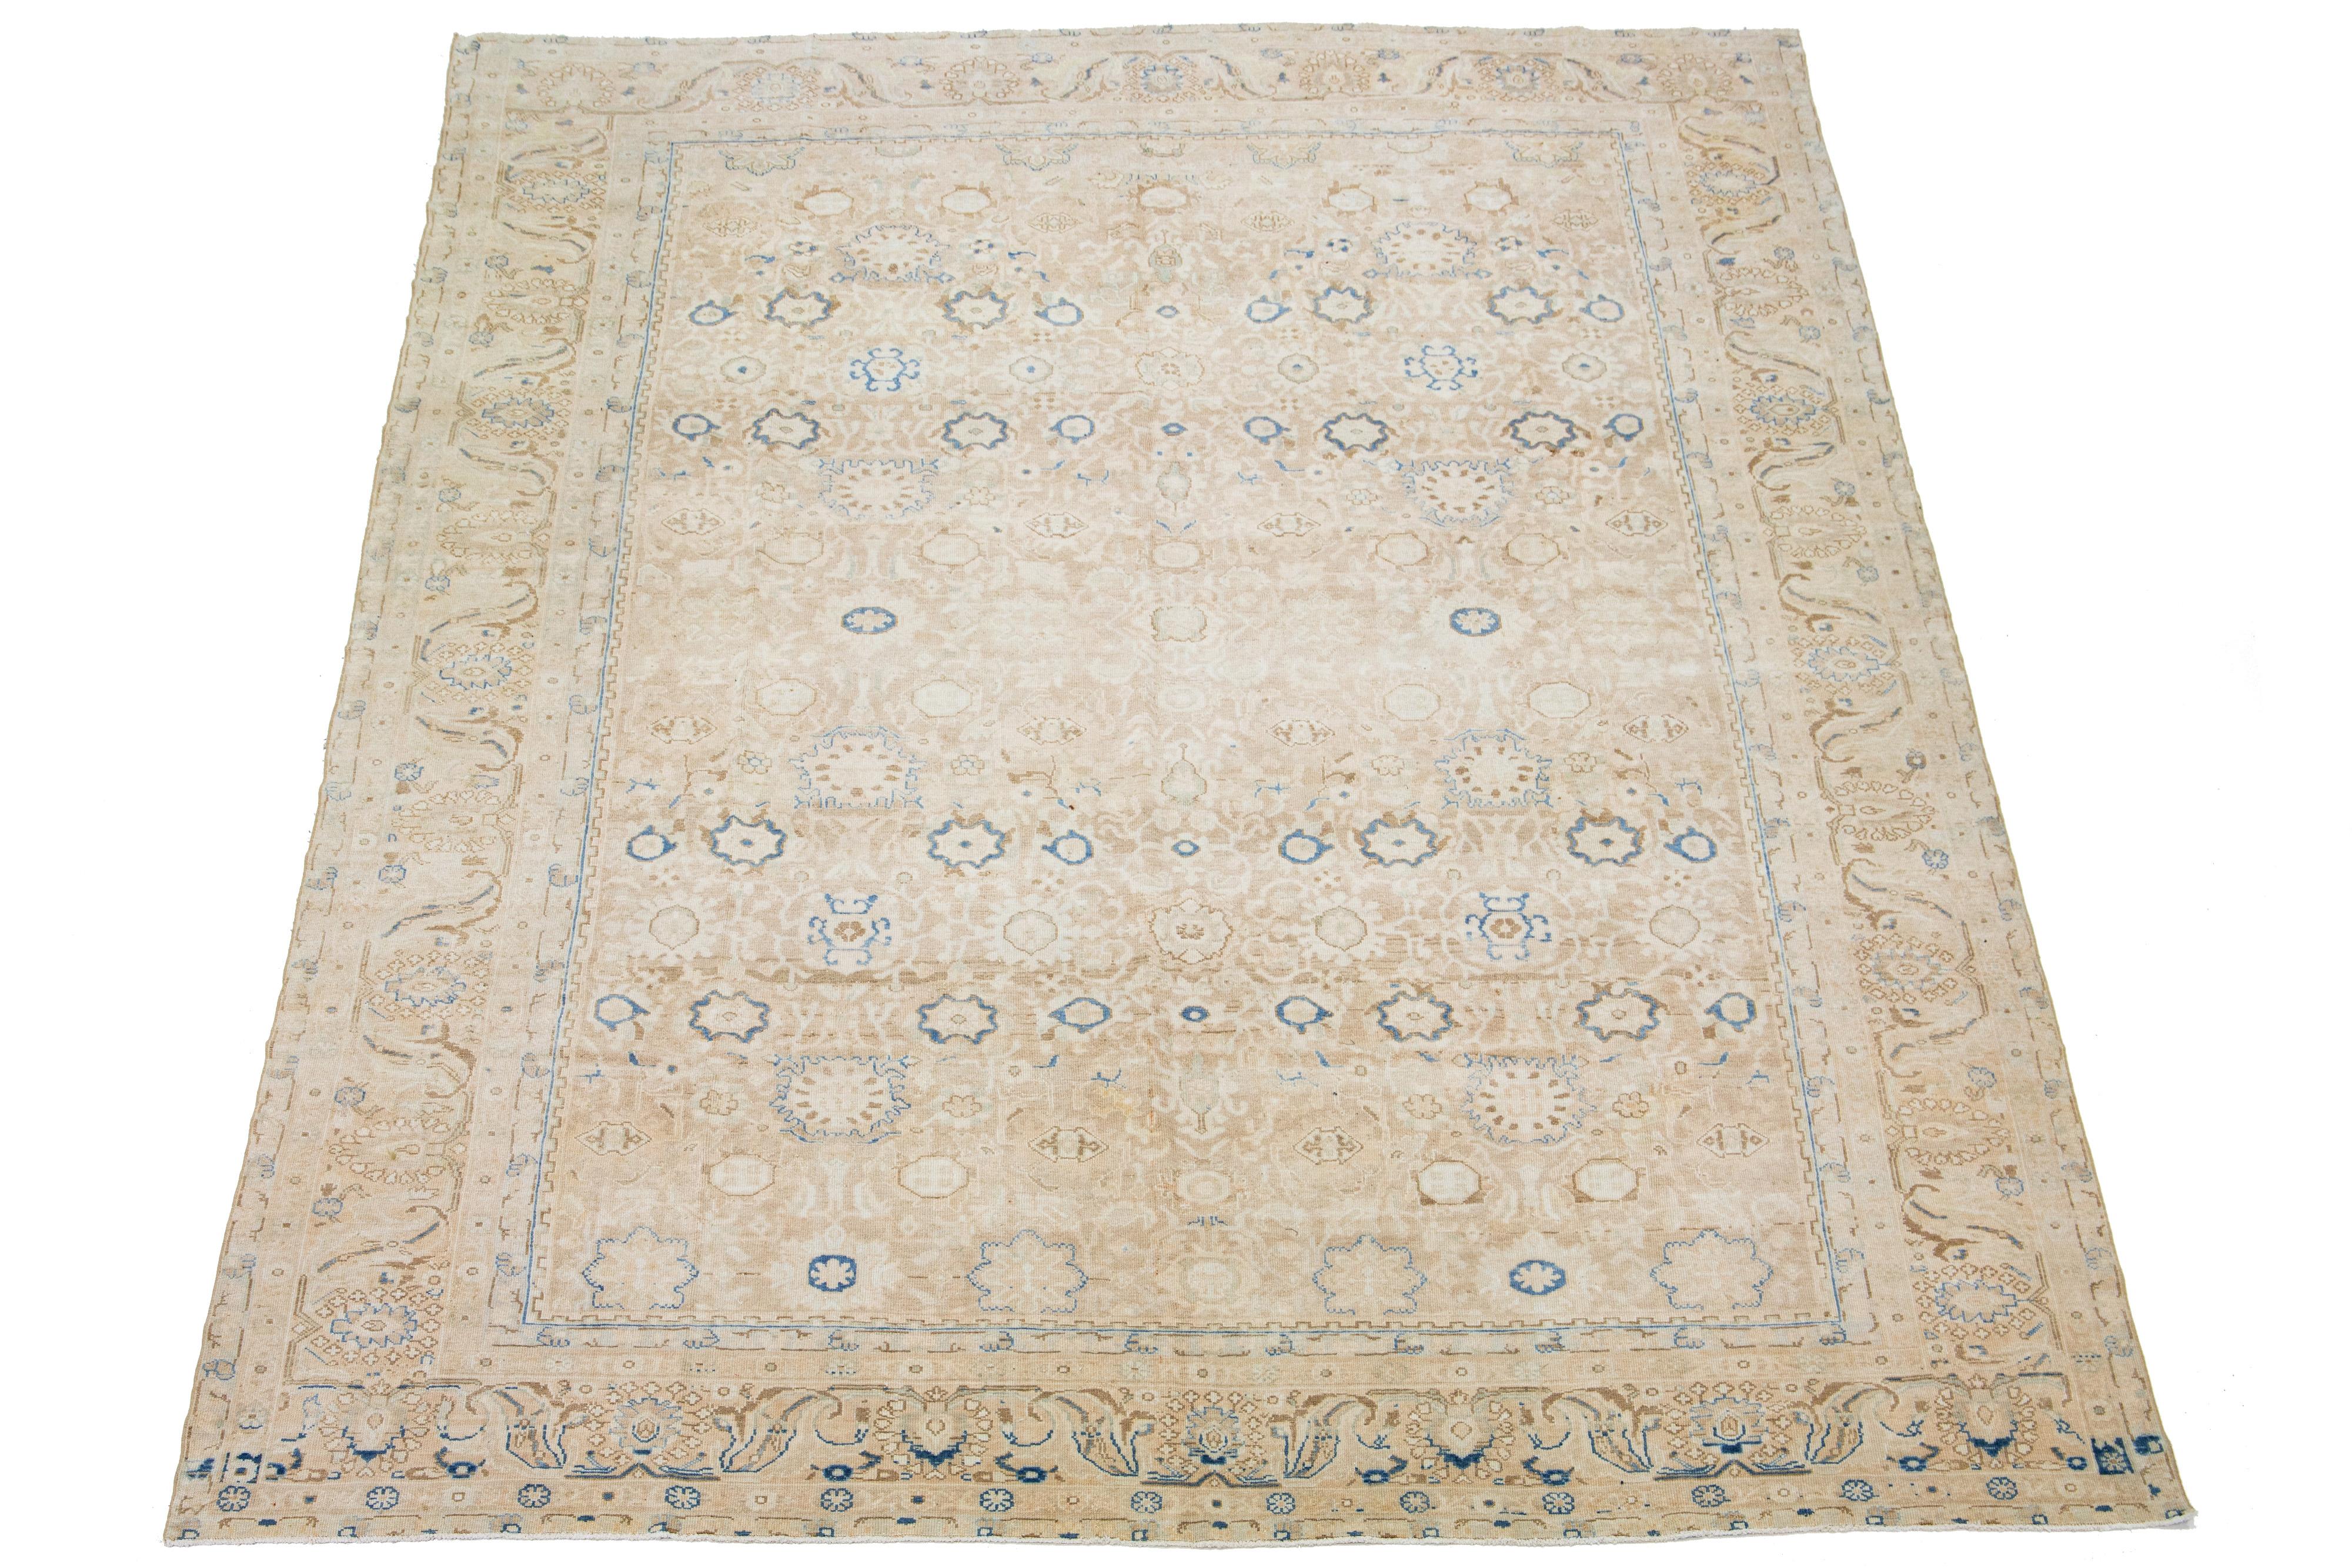 Beautiful antique Malayer hand-knotted wool rug with a beige color field. This Persian rug has a gorgeous traditional floral design with blue, brown, and gray accents.

This rug measures 10'3